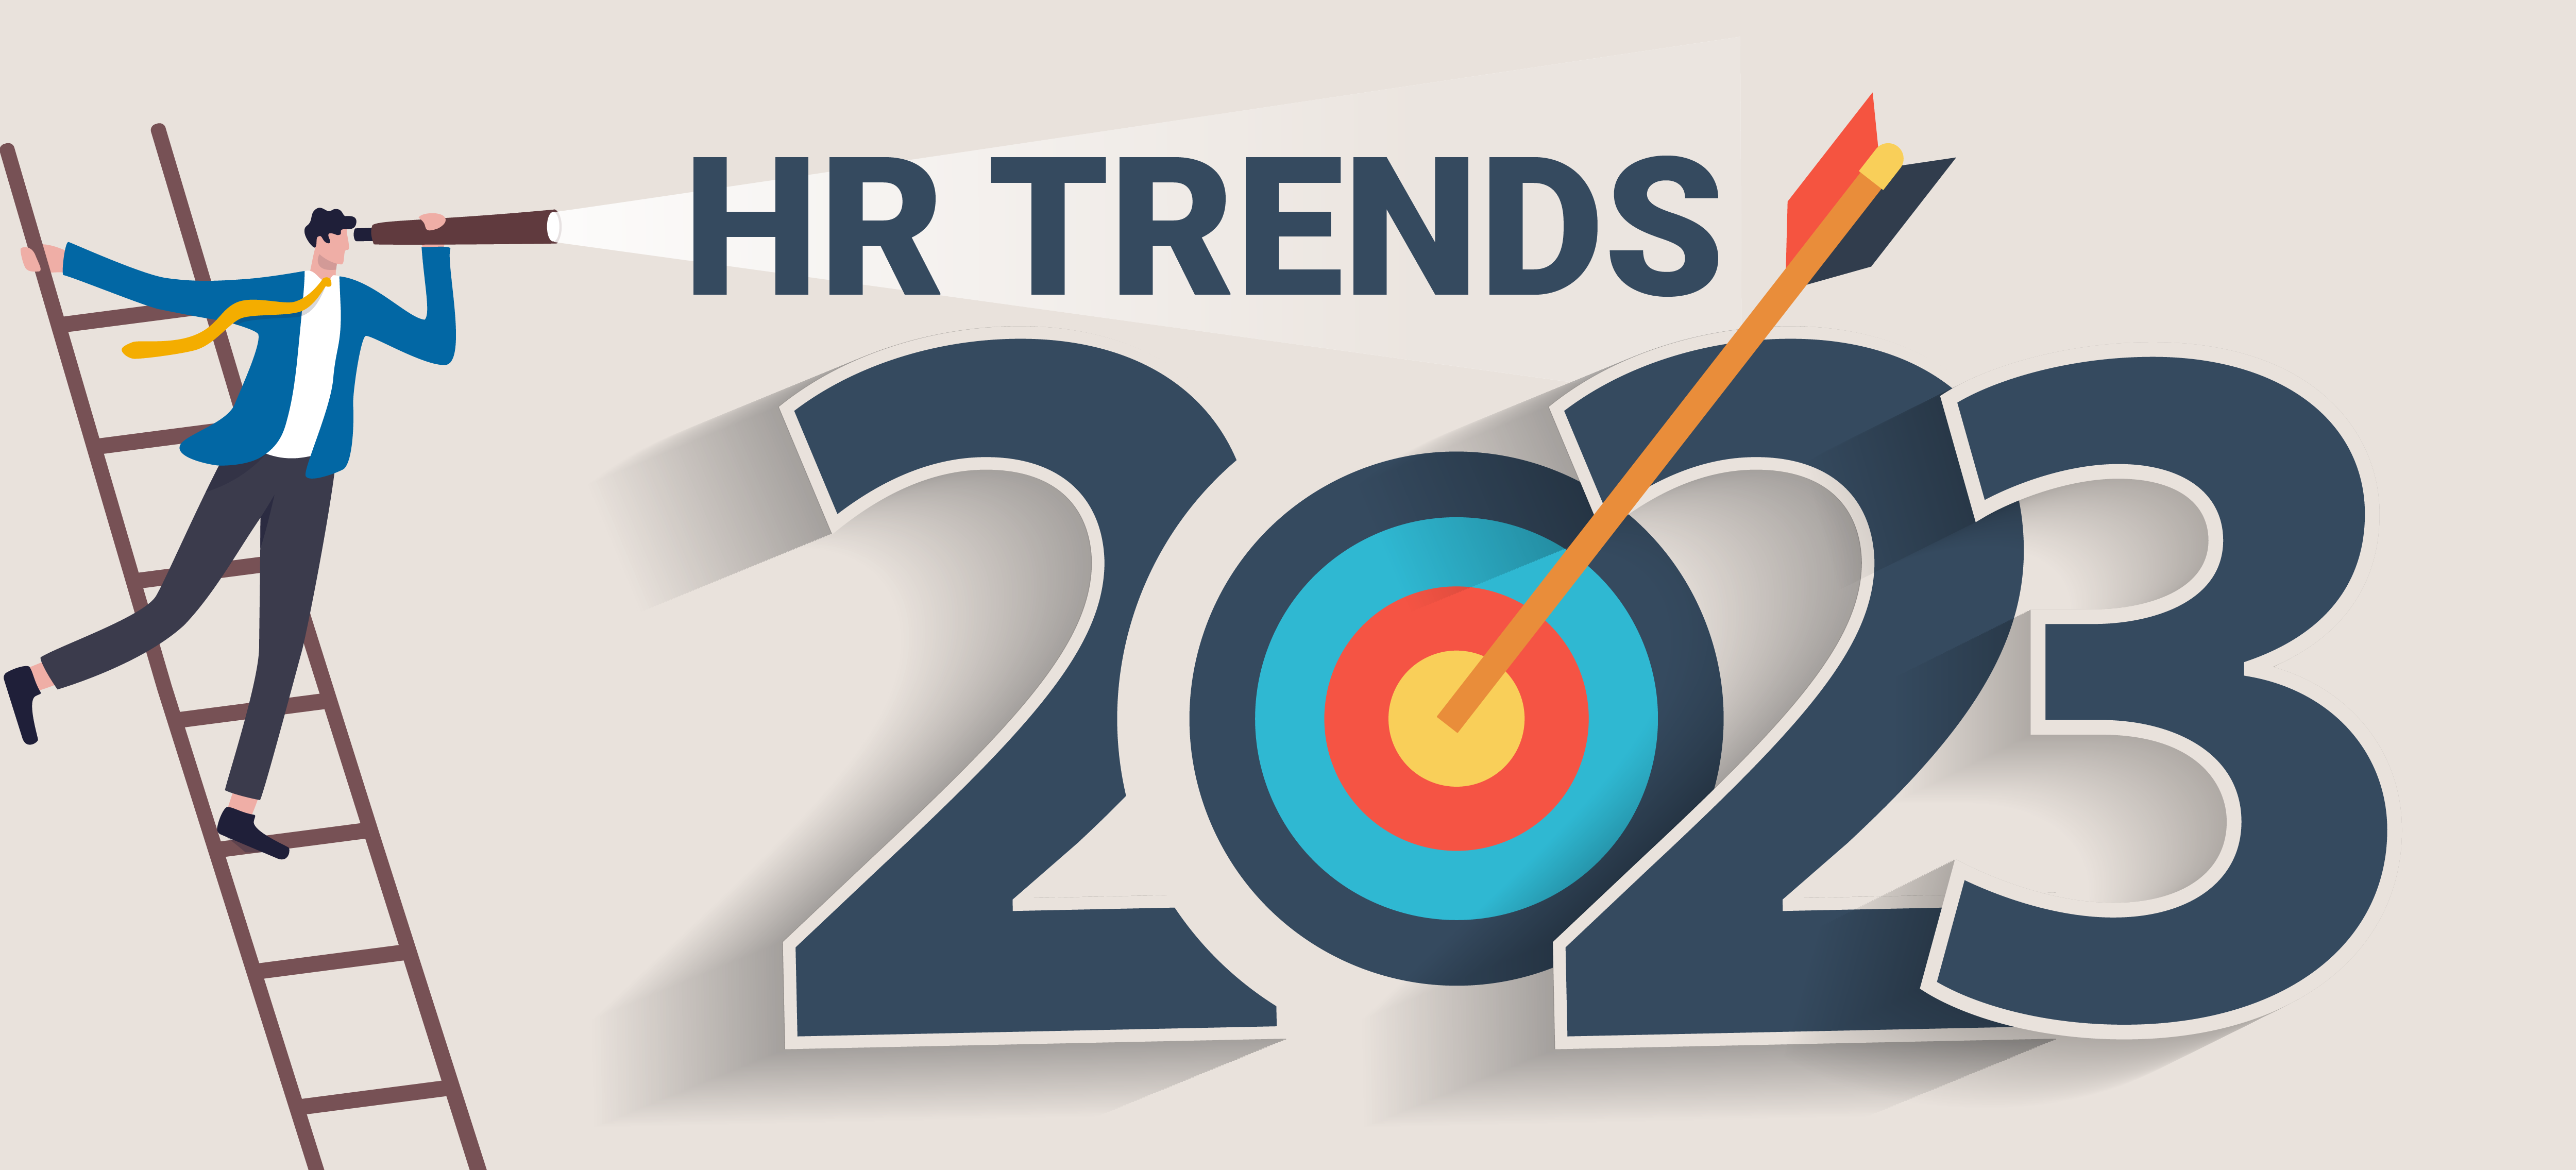 HR Newsletter: 3 HR Trends to Monitor in 2023